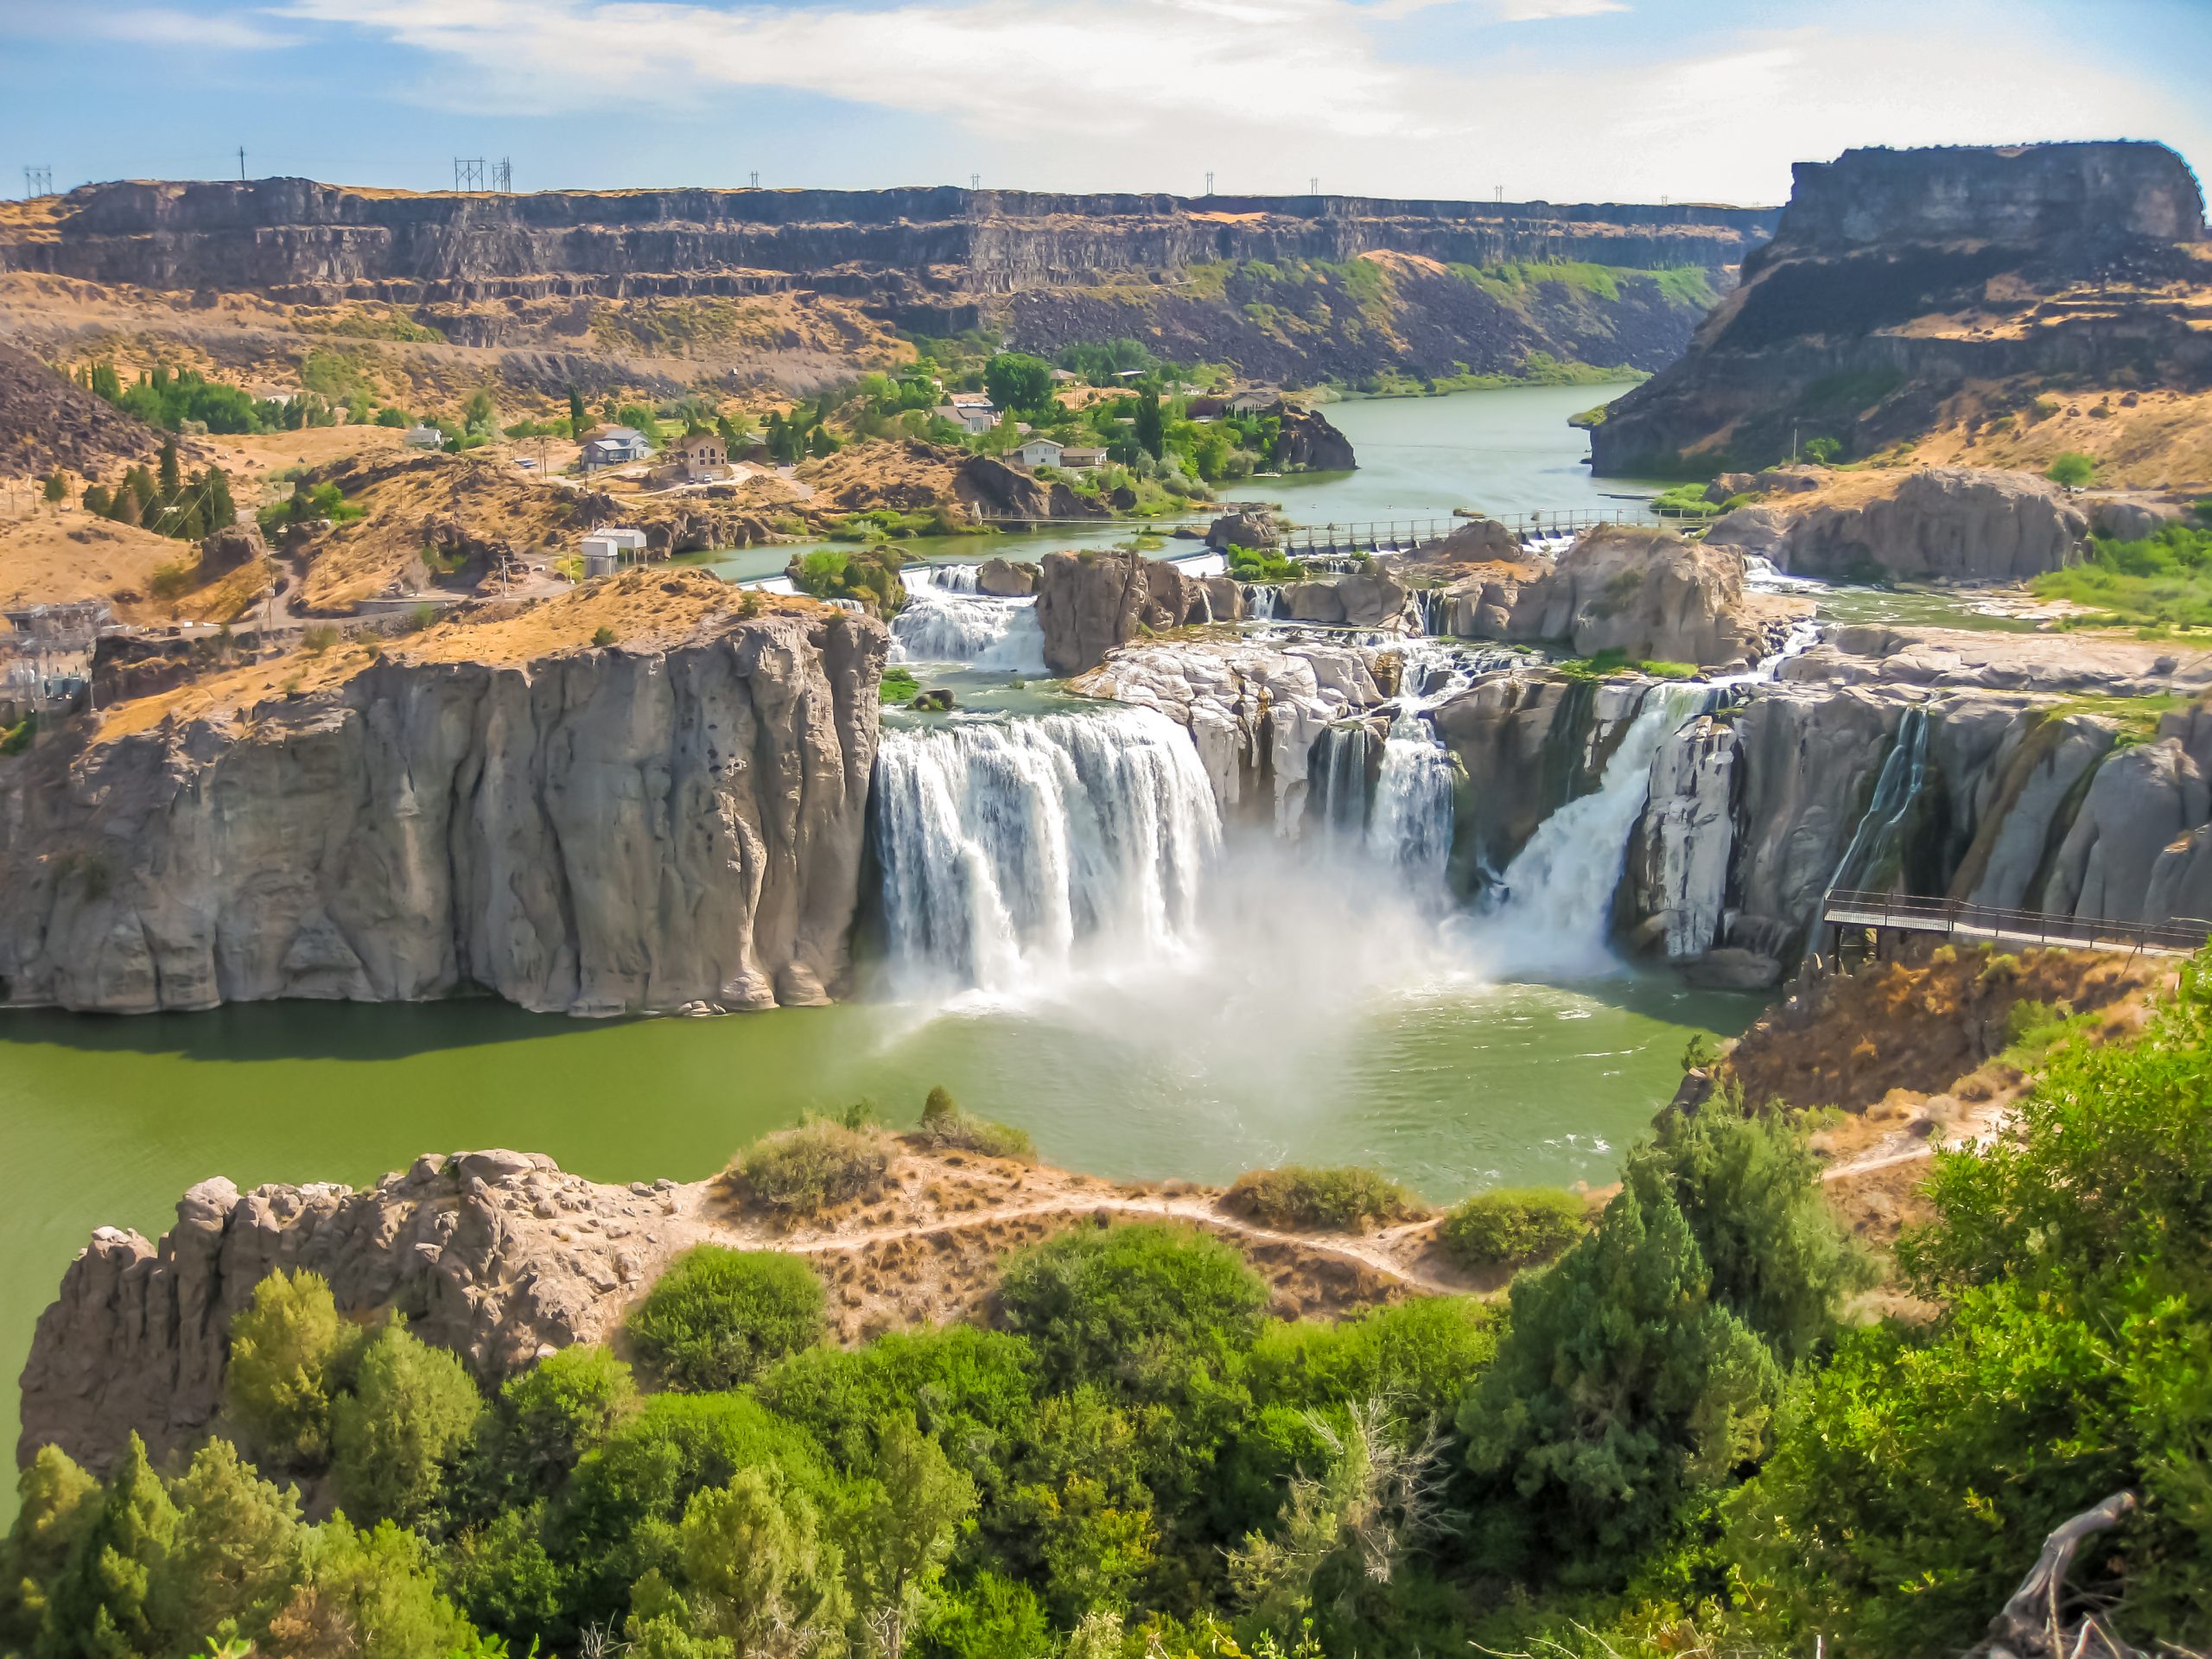 RV parks in the Pacific Northwest Spectacular aerial view of Shoshone Falls or Niagara of the West, Snake River, Idaho